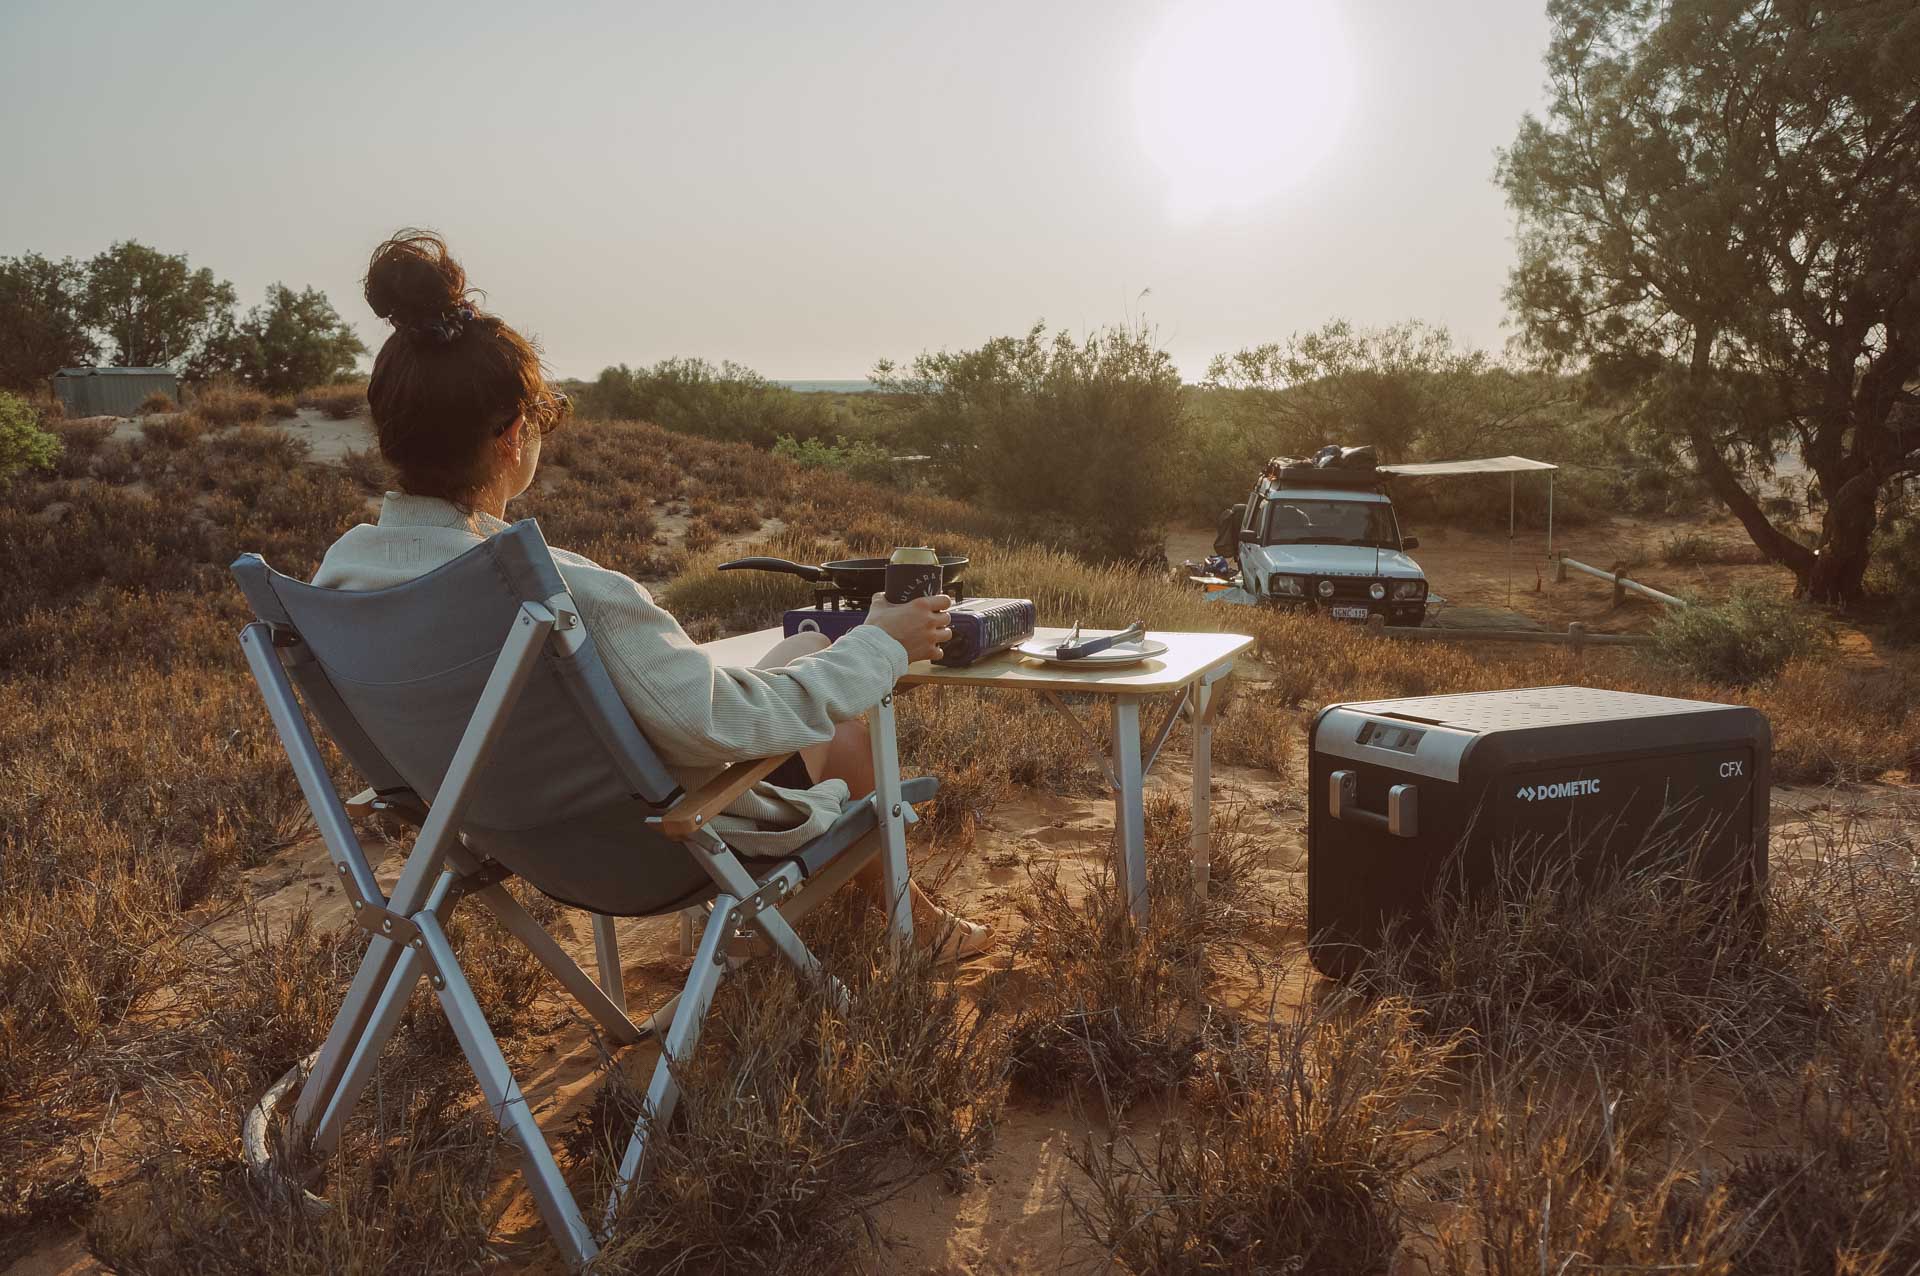 How a Dometic Fridge/Freezer Will Take Your Camping Set Up to the Next Level, gear, dometic, camping, camp cooking, behind shot of a lady on a camp chair looking cooking on a portable stove with a dometic fridge